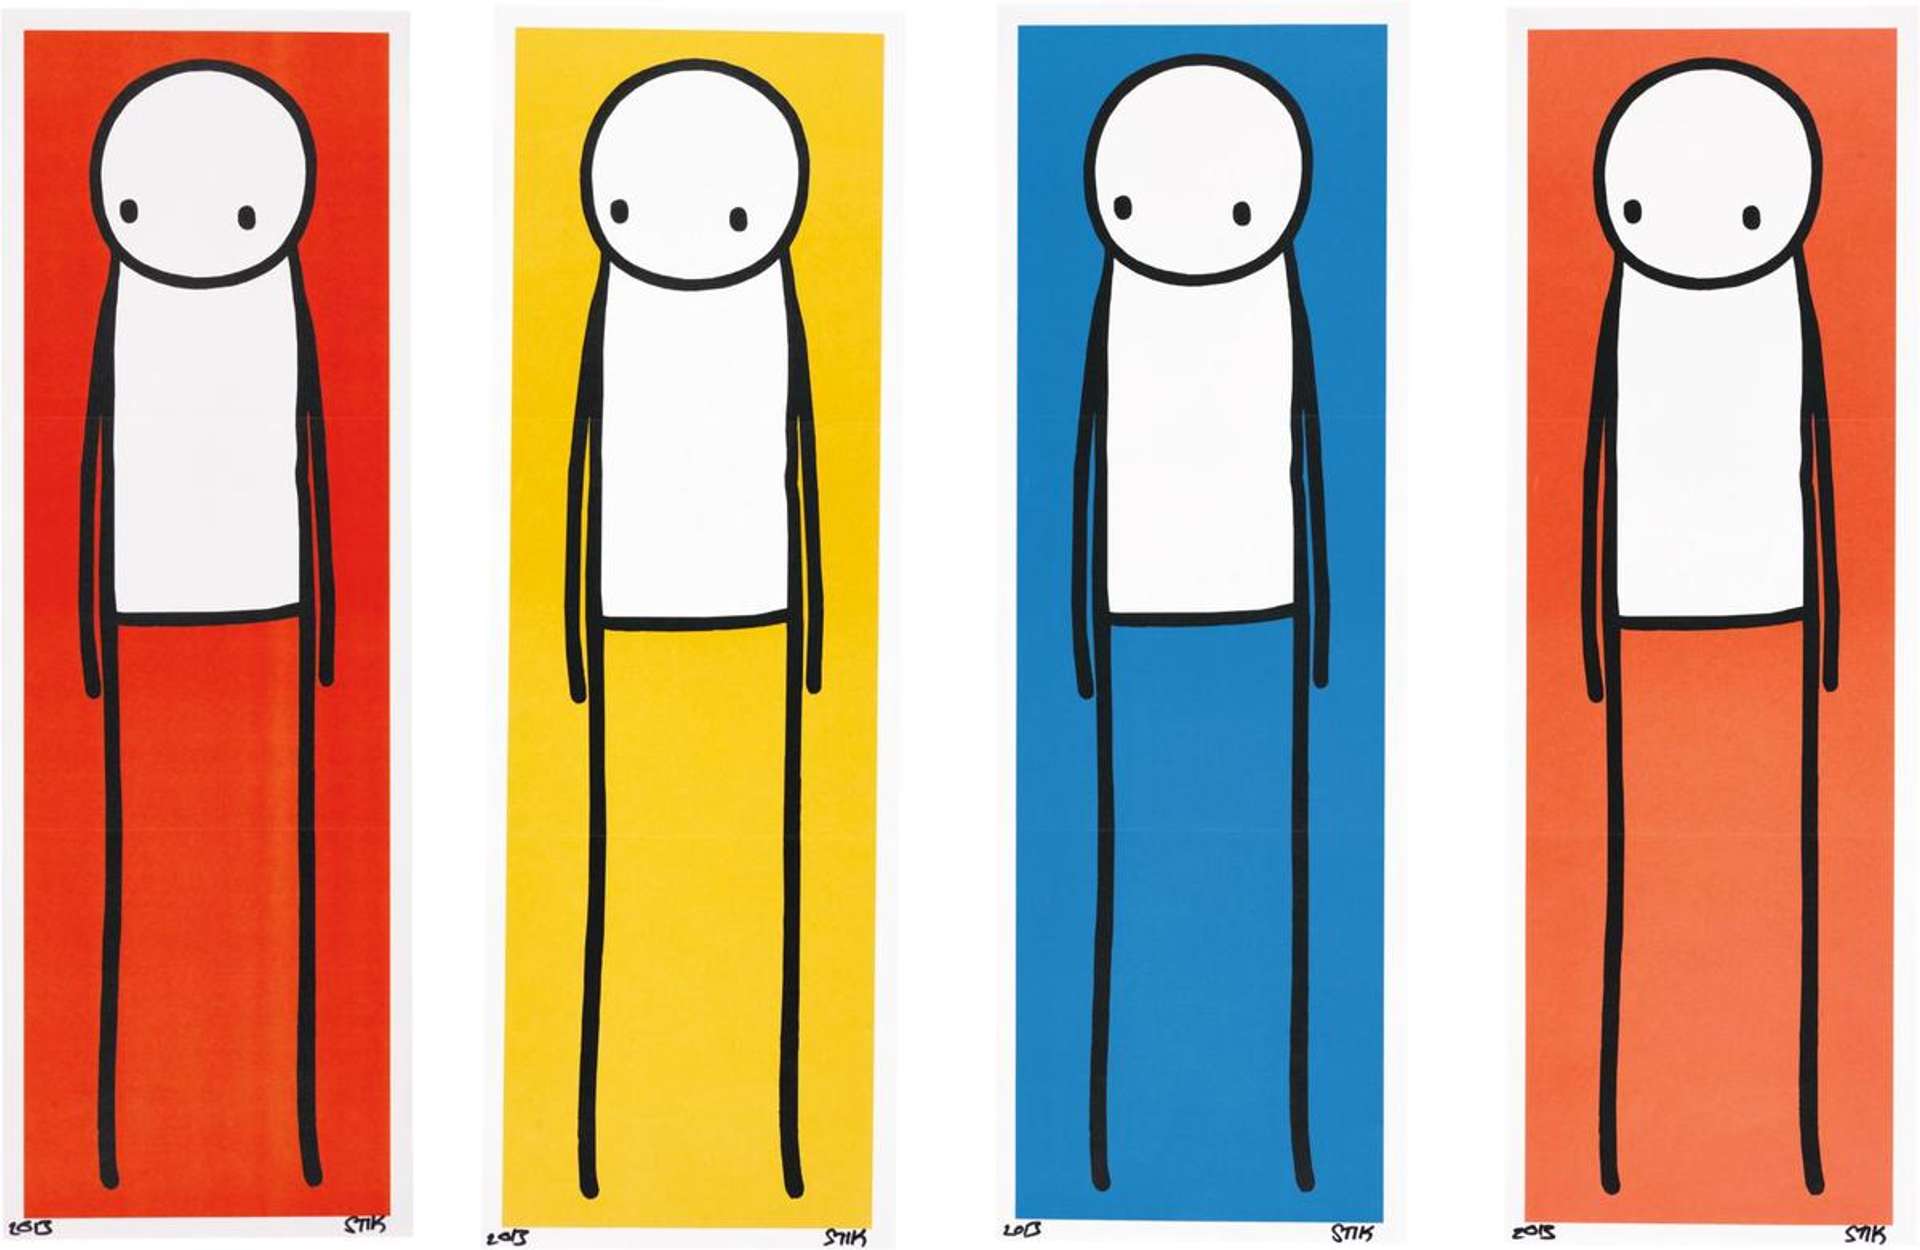 10 Facts About Stik's The Big Issue